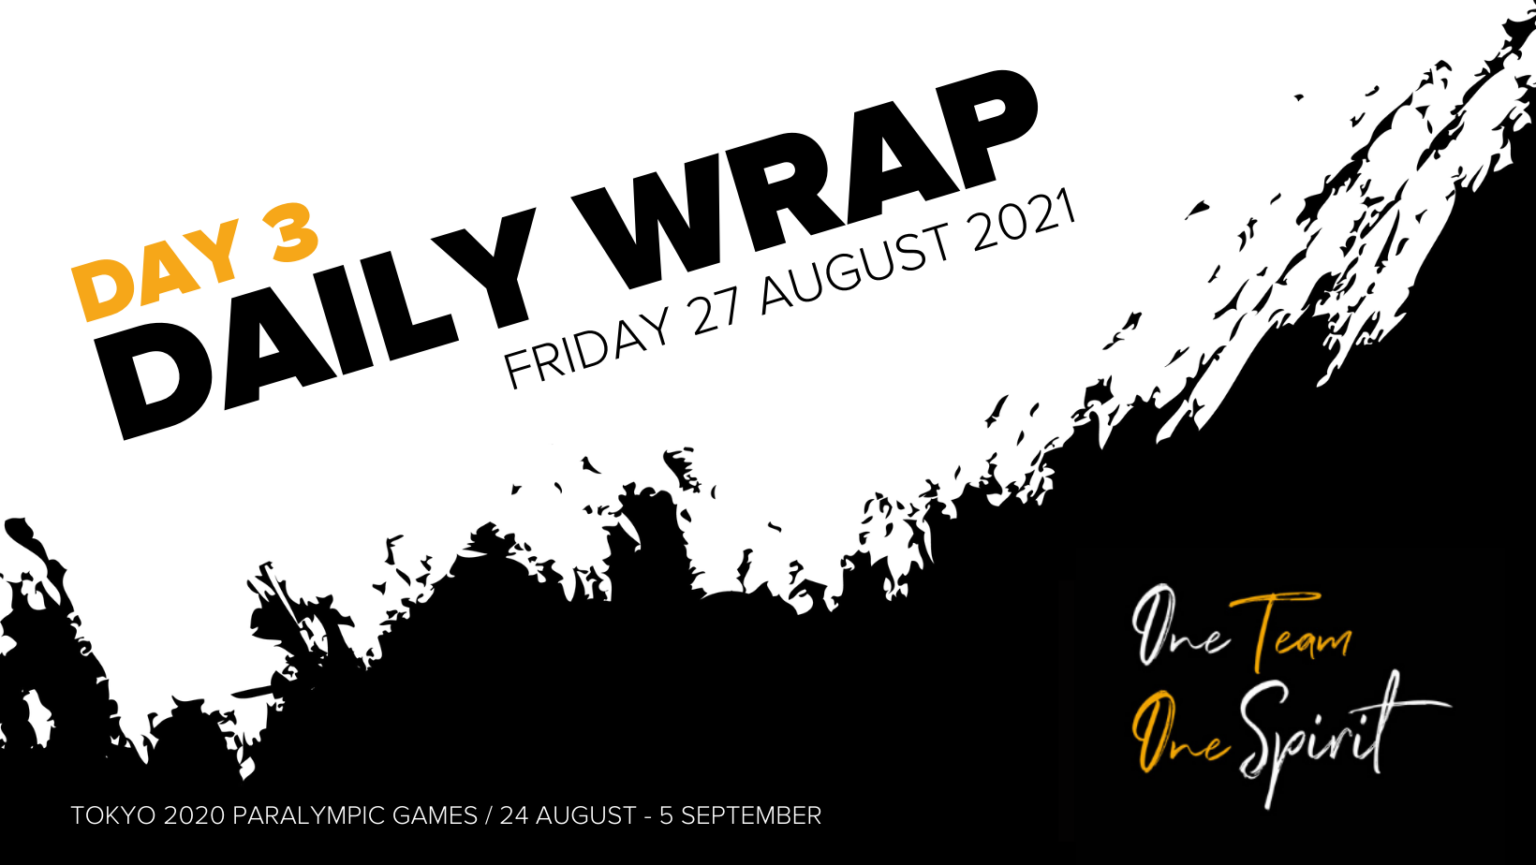 Day 3 - Daily wrap - Friday, 27 August 2021 graphics tile